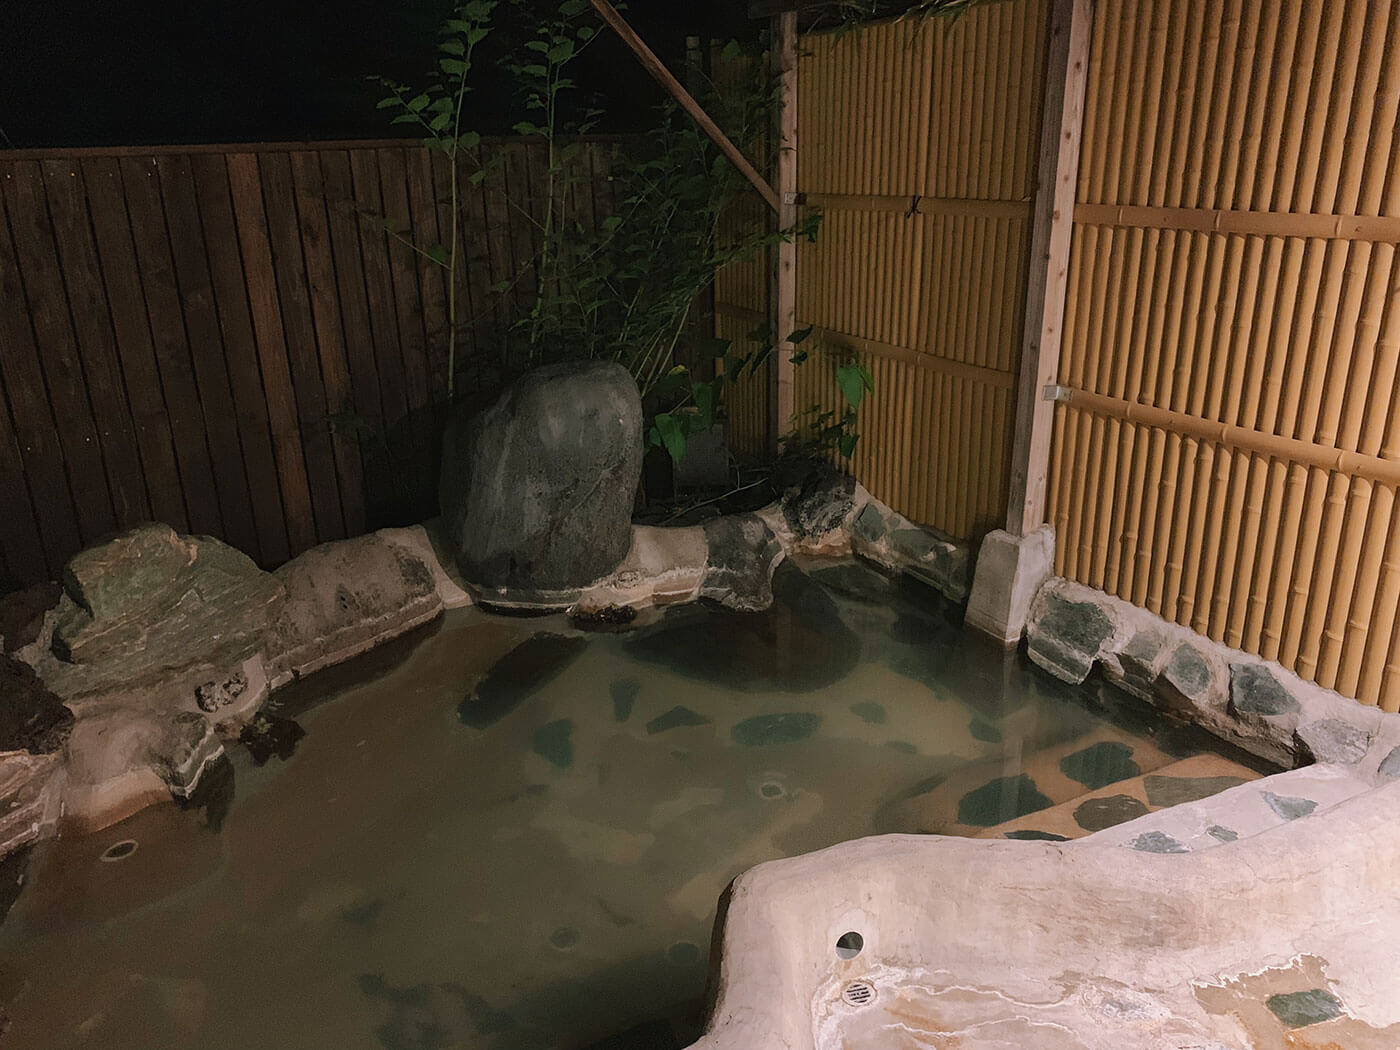 Onsen Guide in Japan - Private Onsen Room